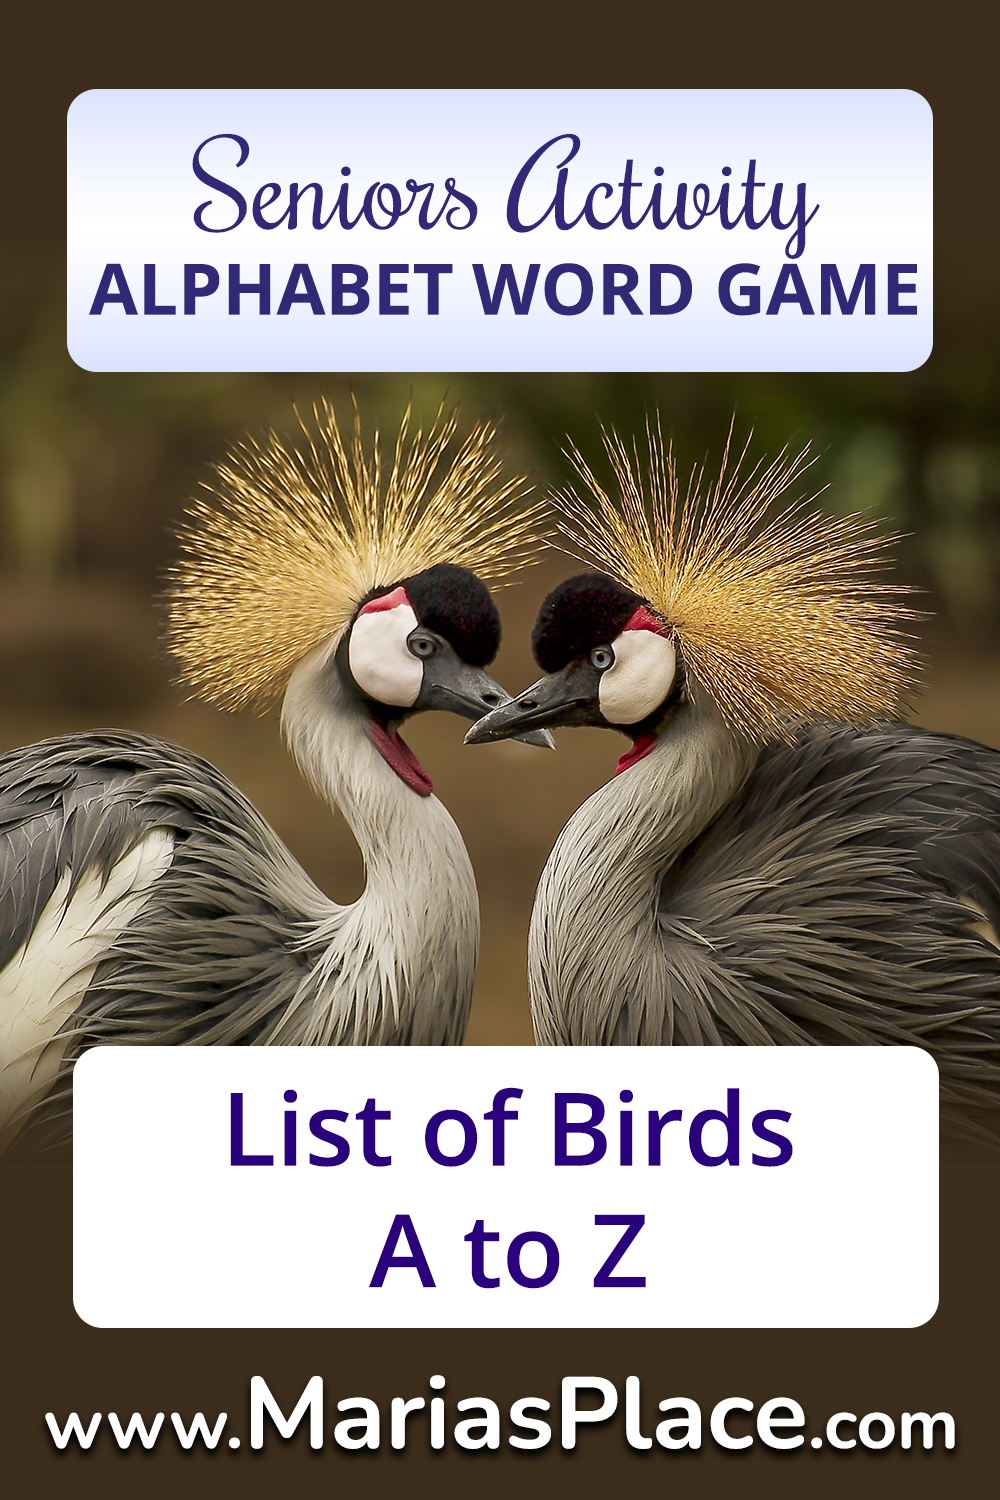 Birds, Examples from A to Z